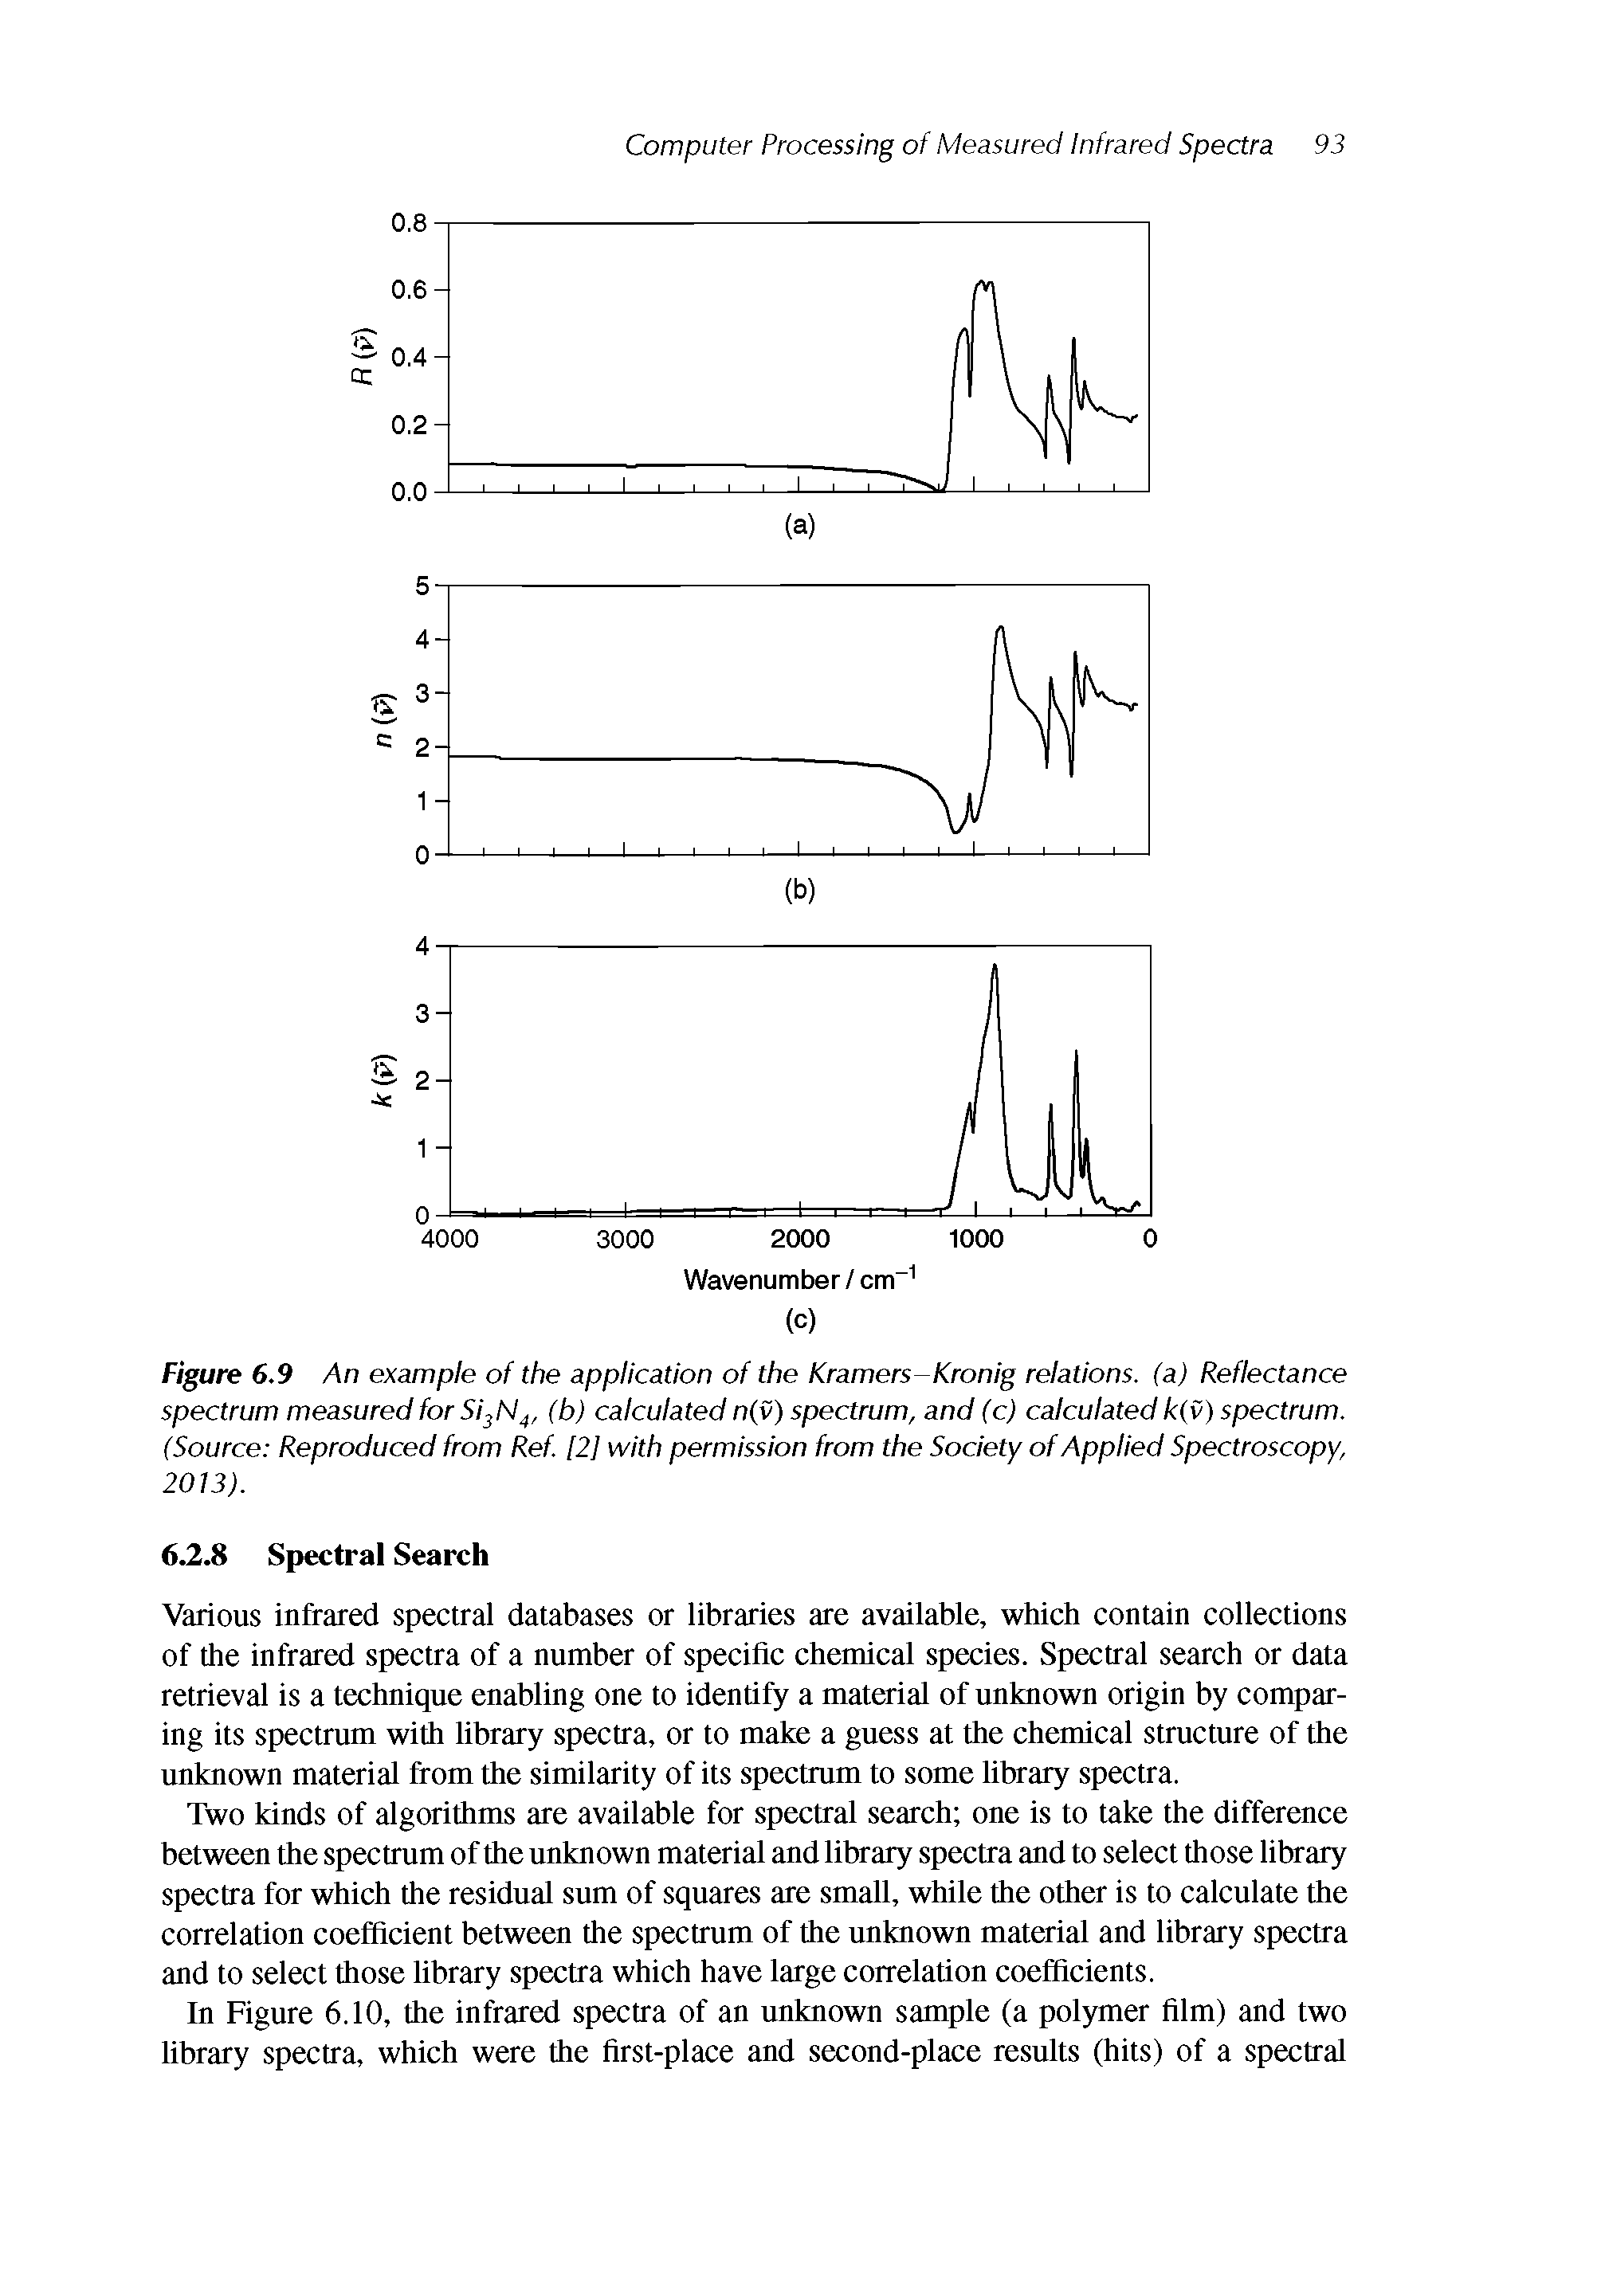 Figure 6.9 An example of the application of the Kramers Kronig relations, (a) Reflectance spectrum measured for Si N(b) calculated n(v) spectrum, and (c) calculated k(v) spectrum. (Source Reproduced from Ref. [21 with permission from the Society of Applied Spectroscopy, 2013).